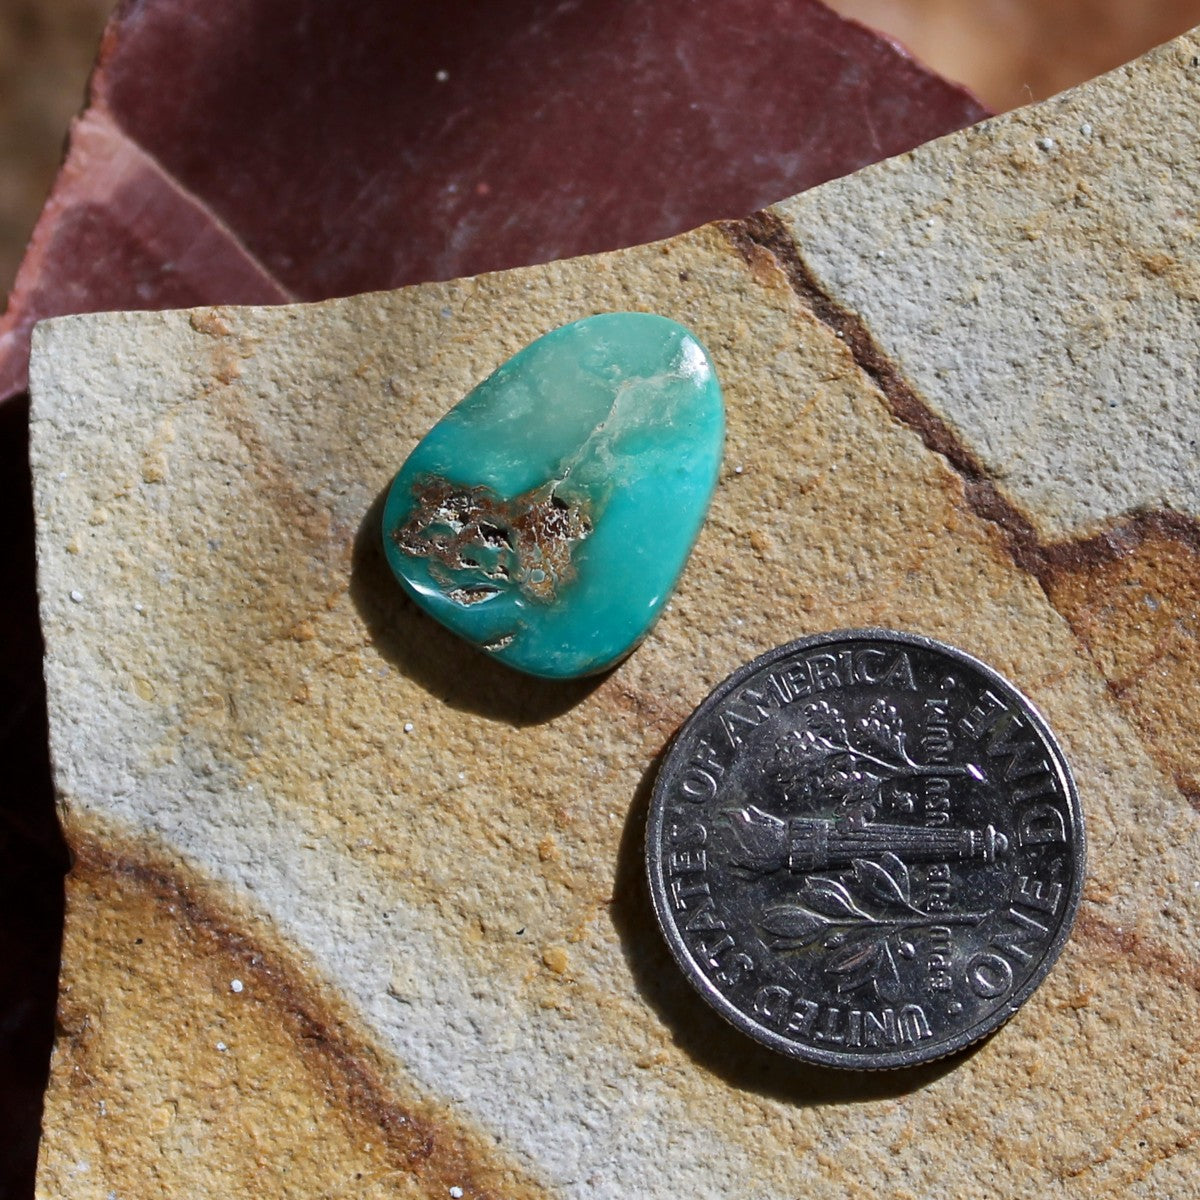 4.5 carat green Stone Mountain Turquoise cabochon